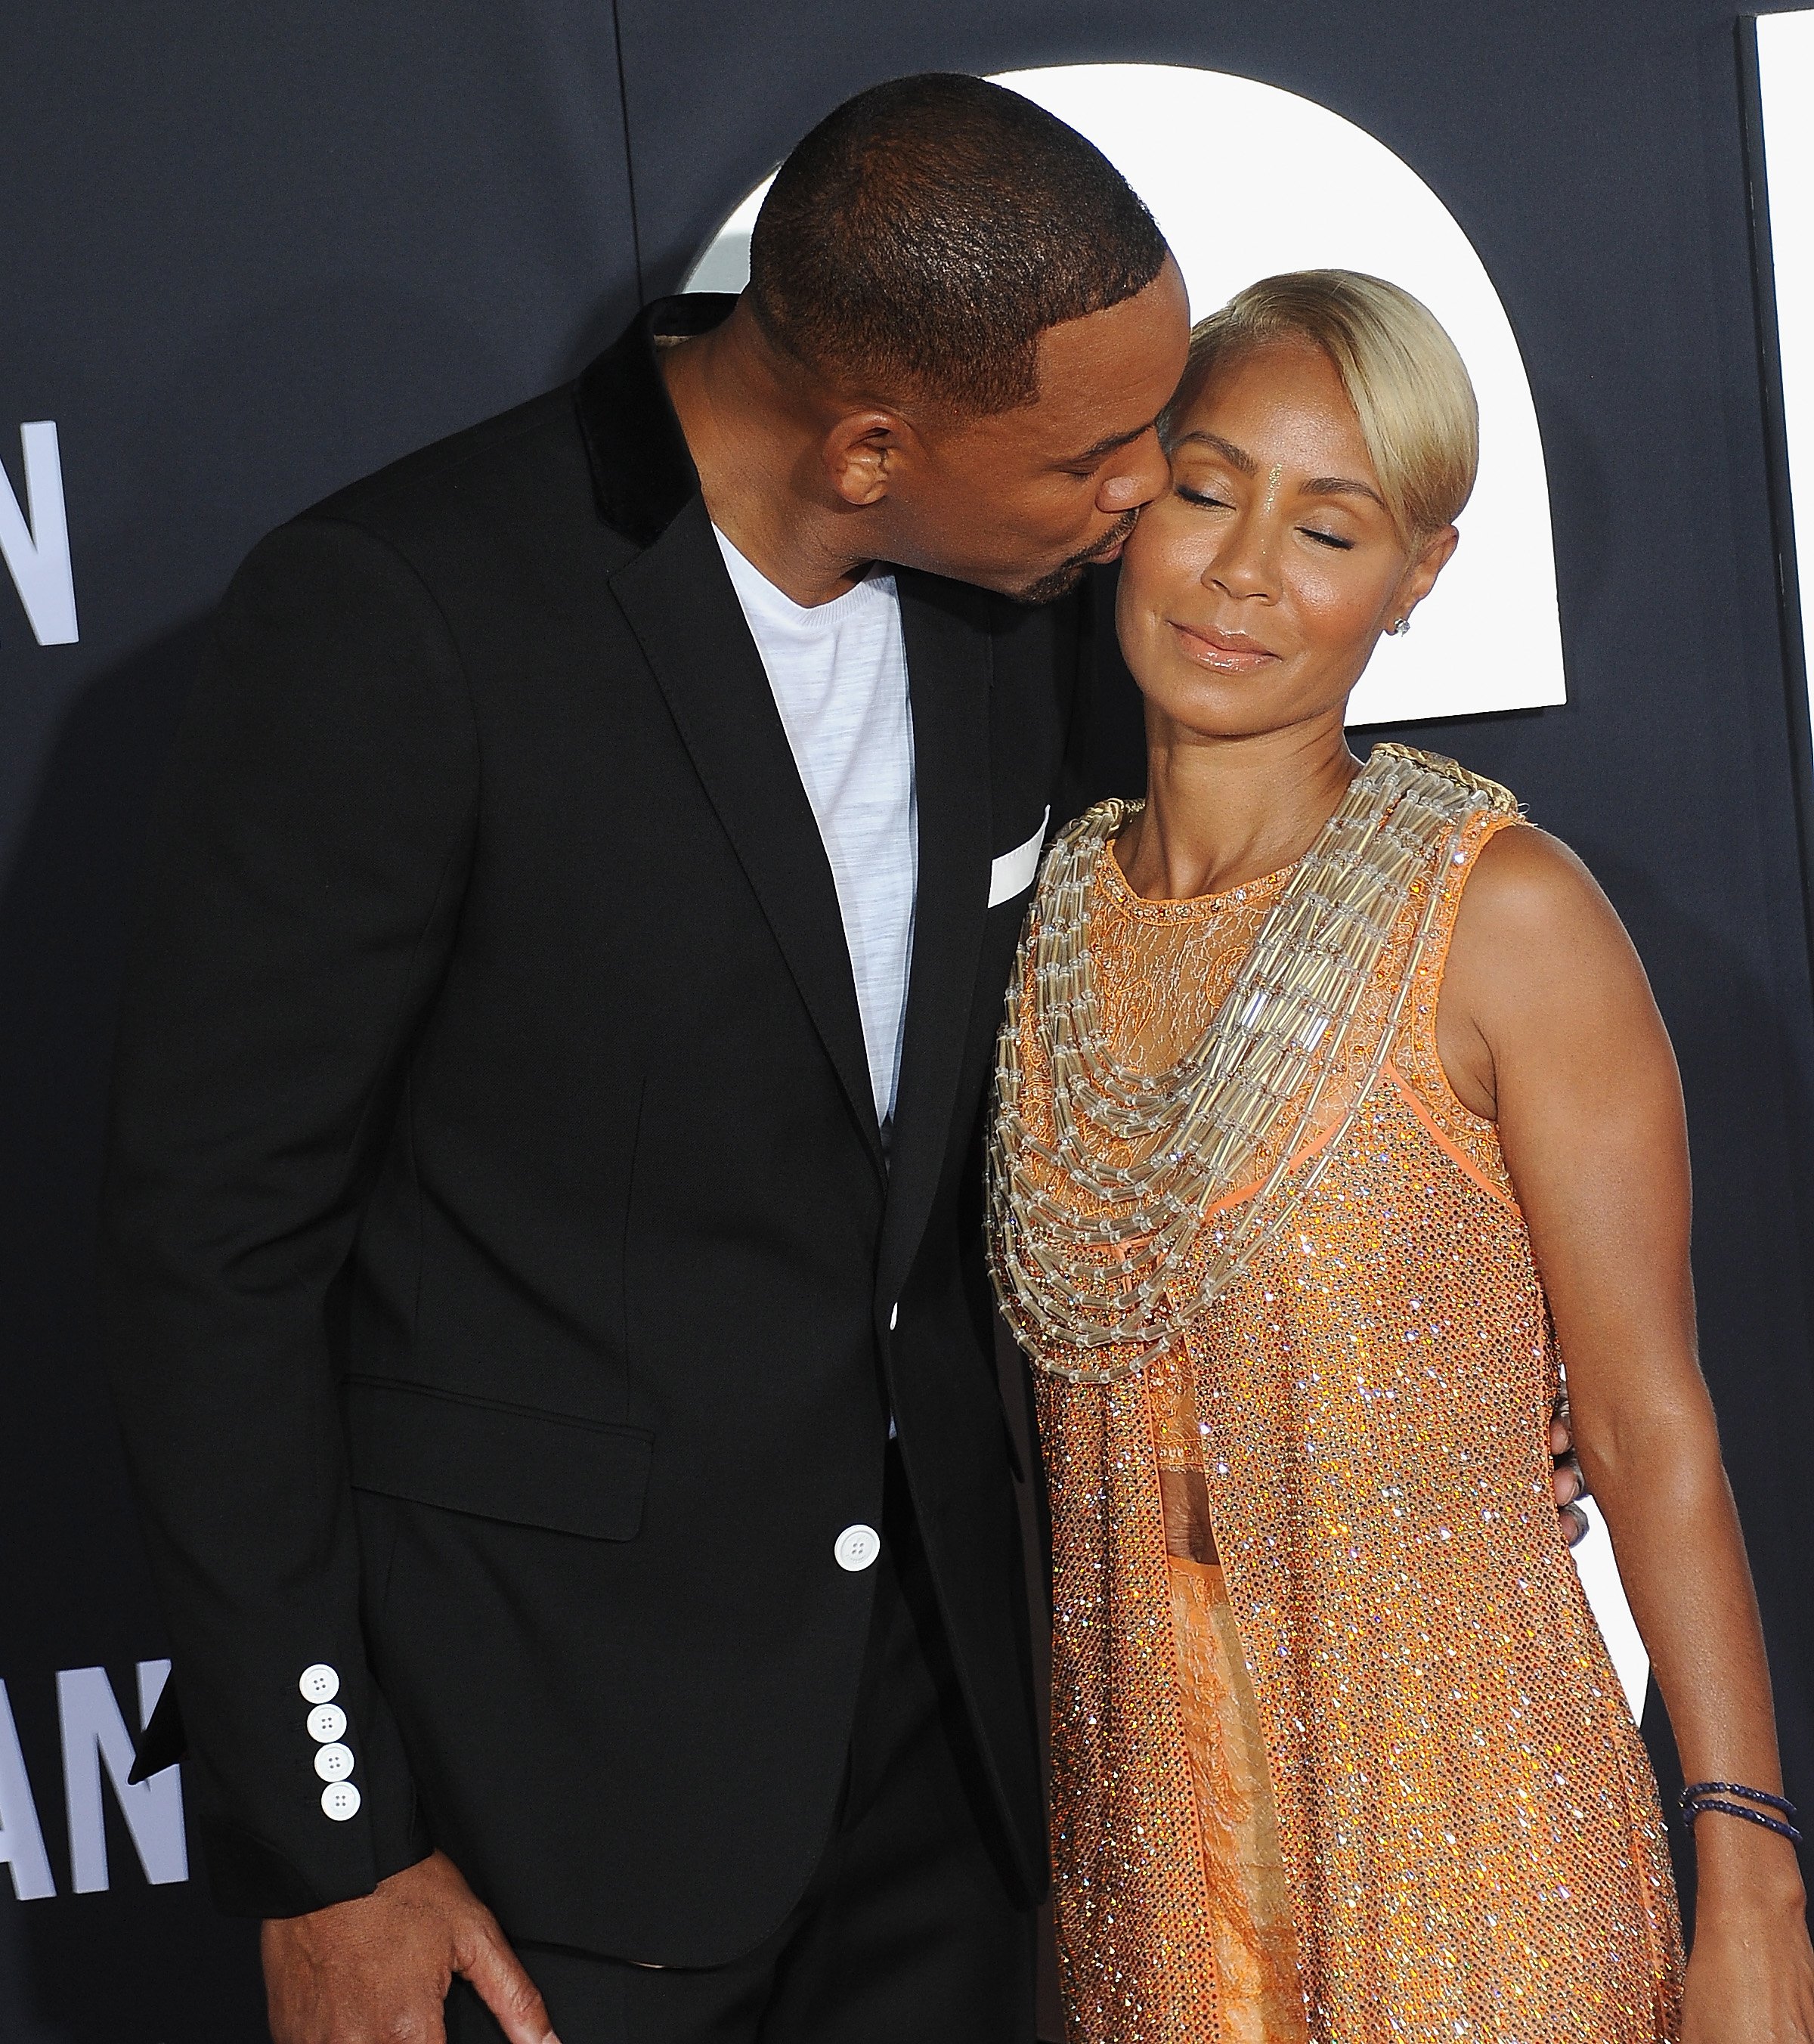 Will Smith and Jada Pinkett Smith arrive for Paramount Pictures' Premiere Of "Gemini Man" held at TCL Chinese Theatre on October 6, 2019 | Source: Getty Images